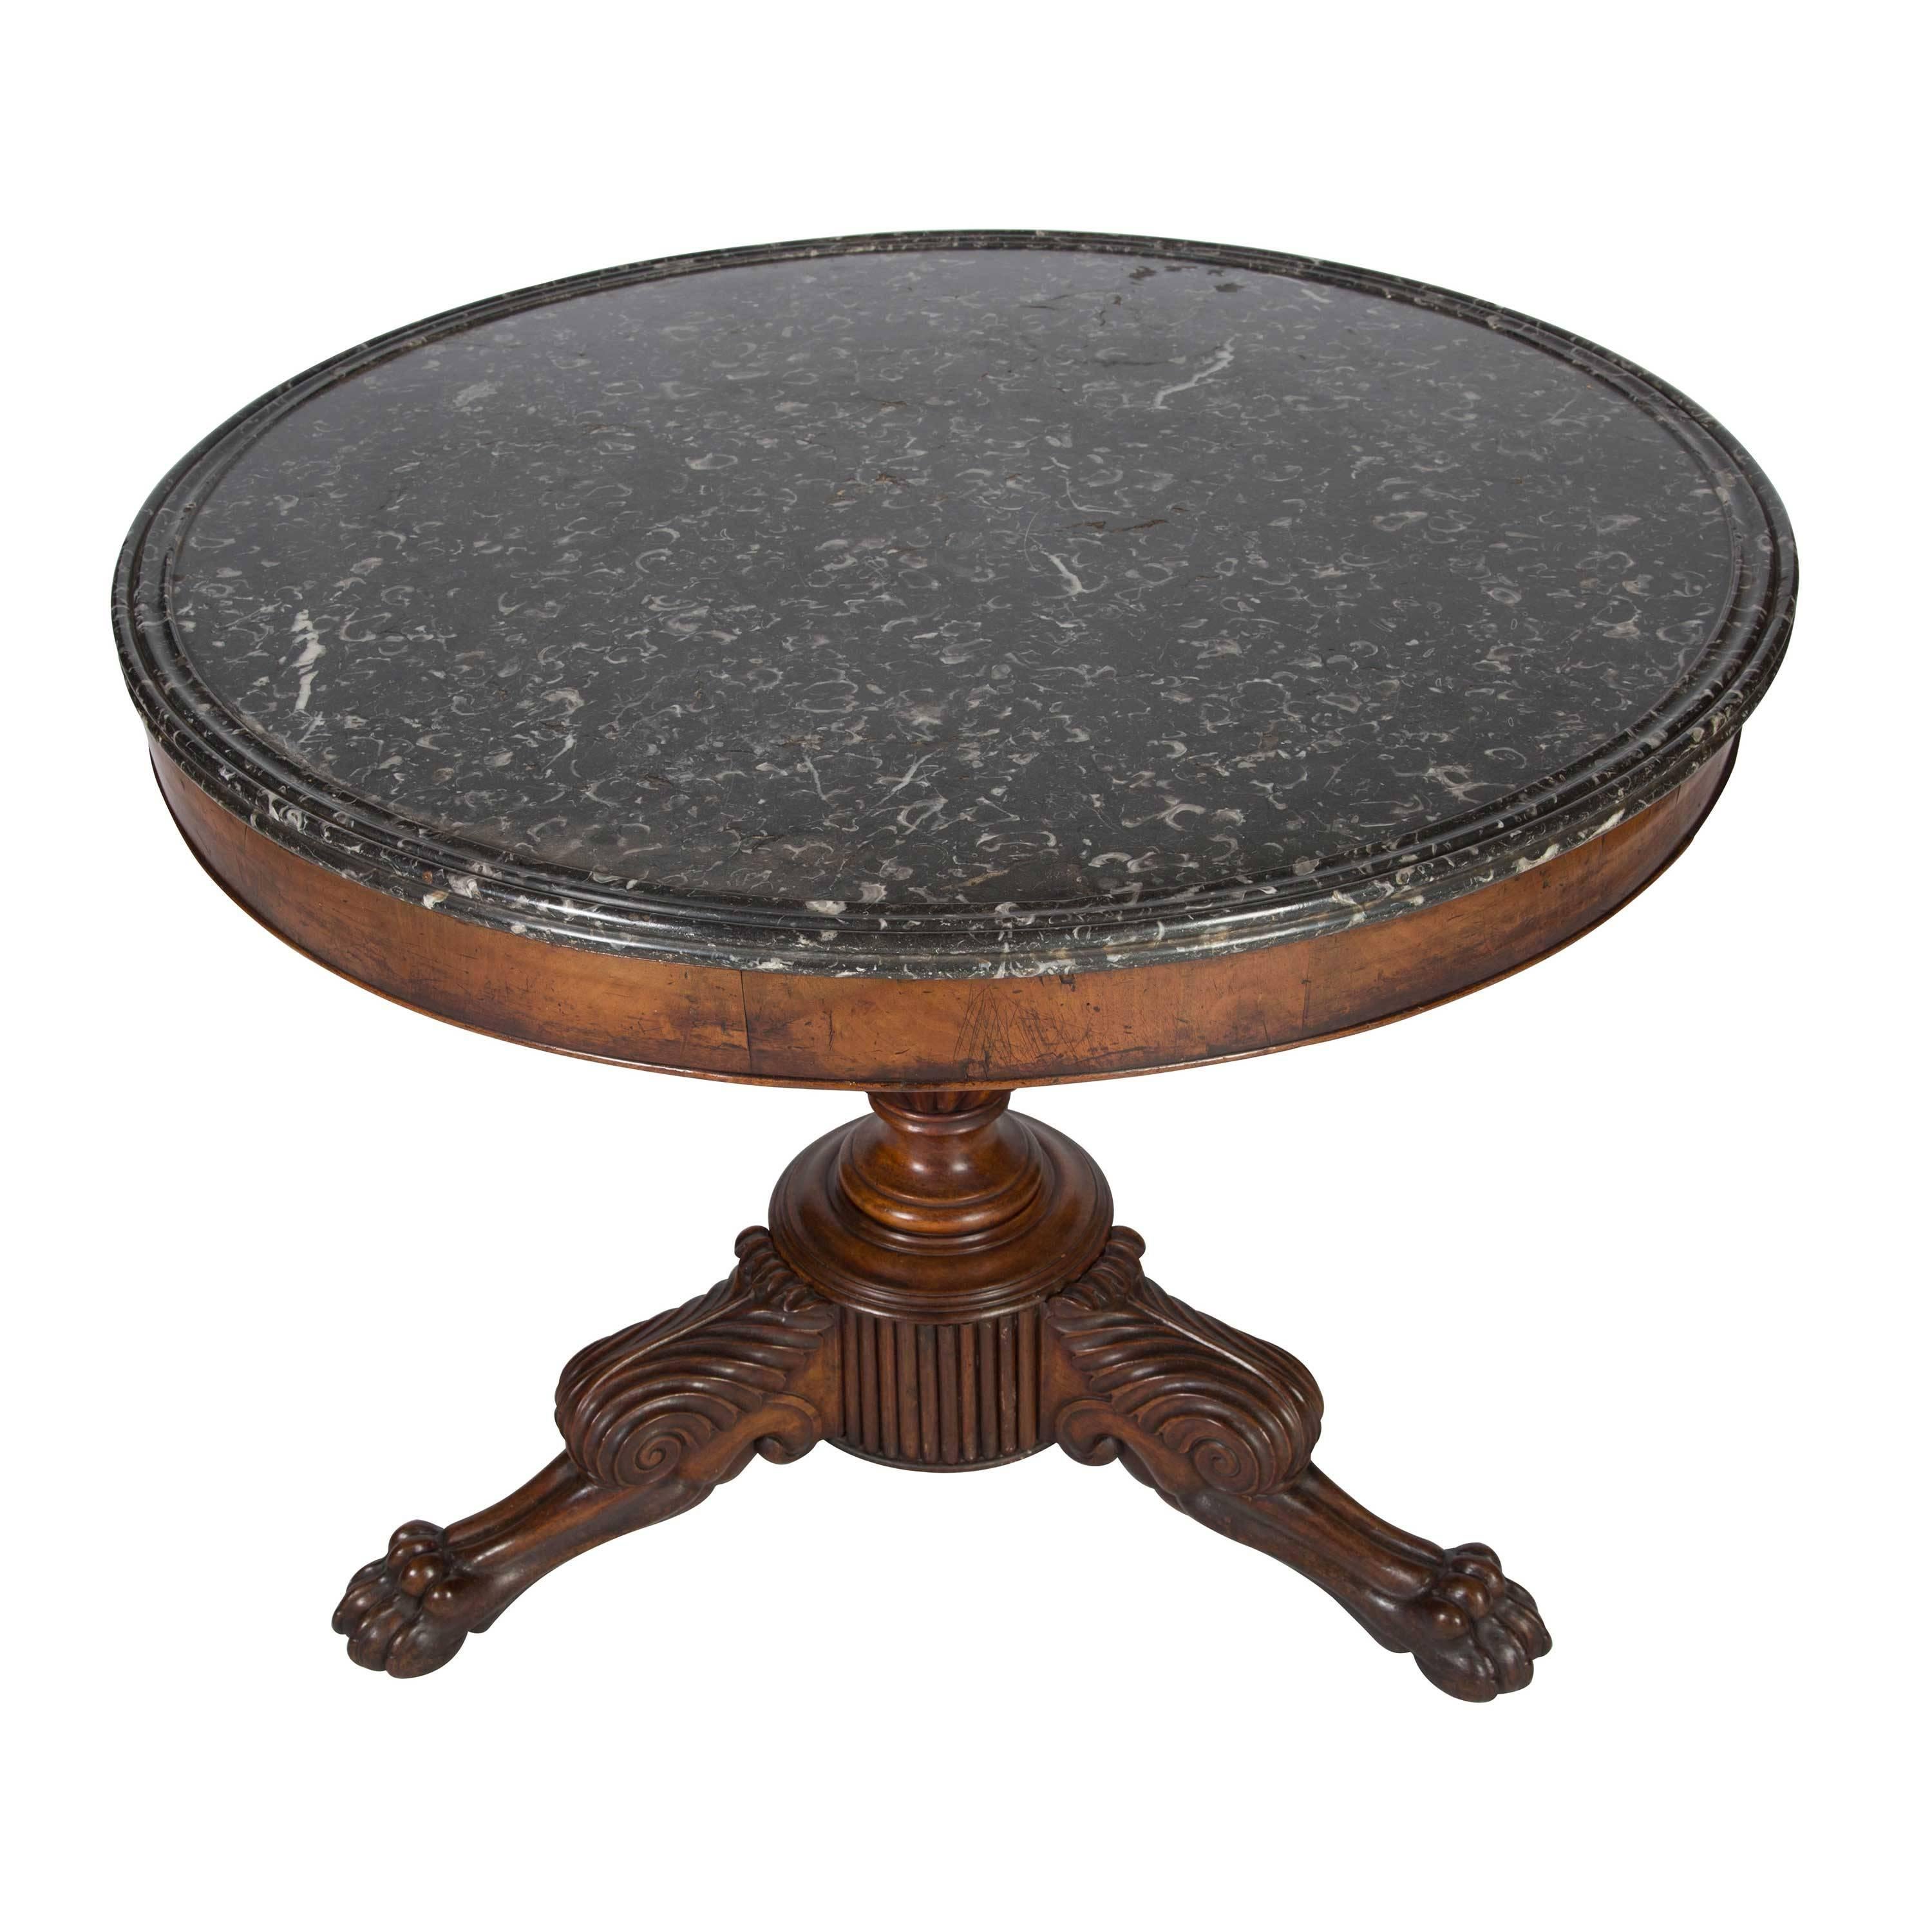 Louis Phillipe walnut gueridon center table with a superb grey fossil marble-top, circa 1840.
  